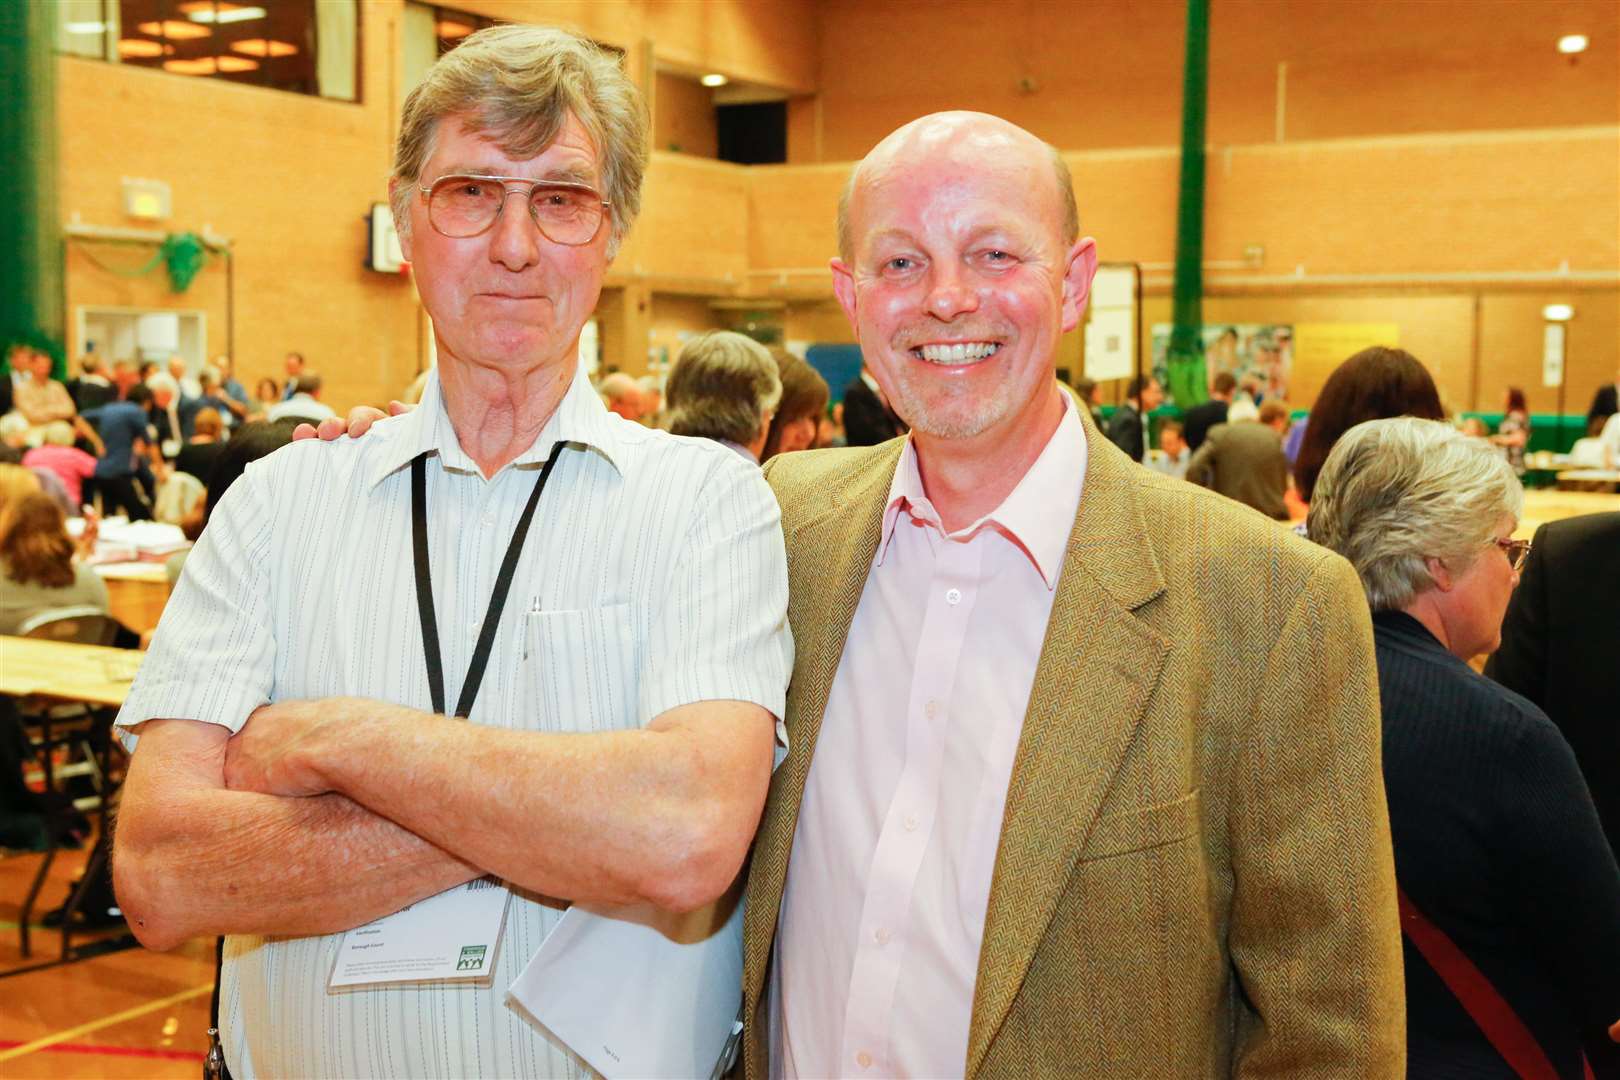 Cllrs Mike Taylor and Tim Shaw on the day of their election to represent Borough Green and Long Mill